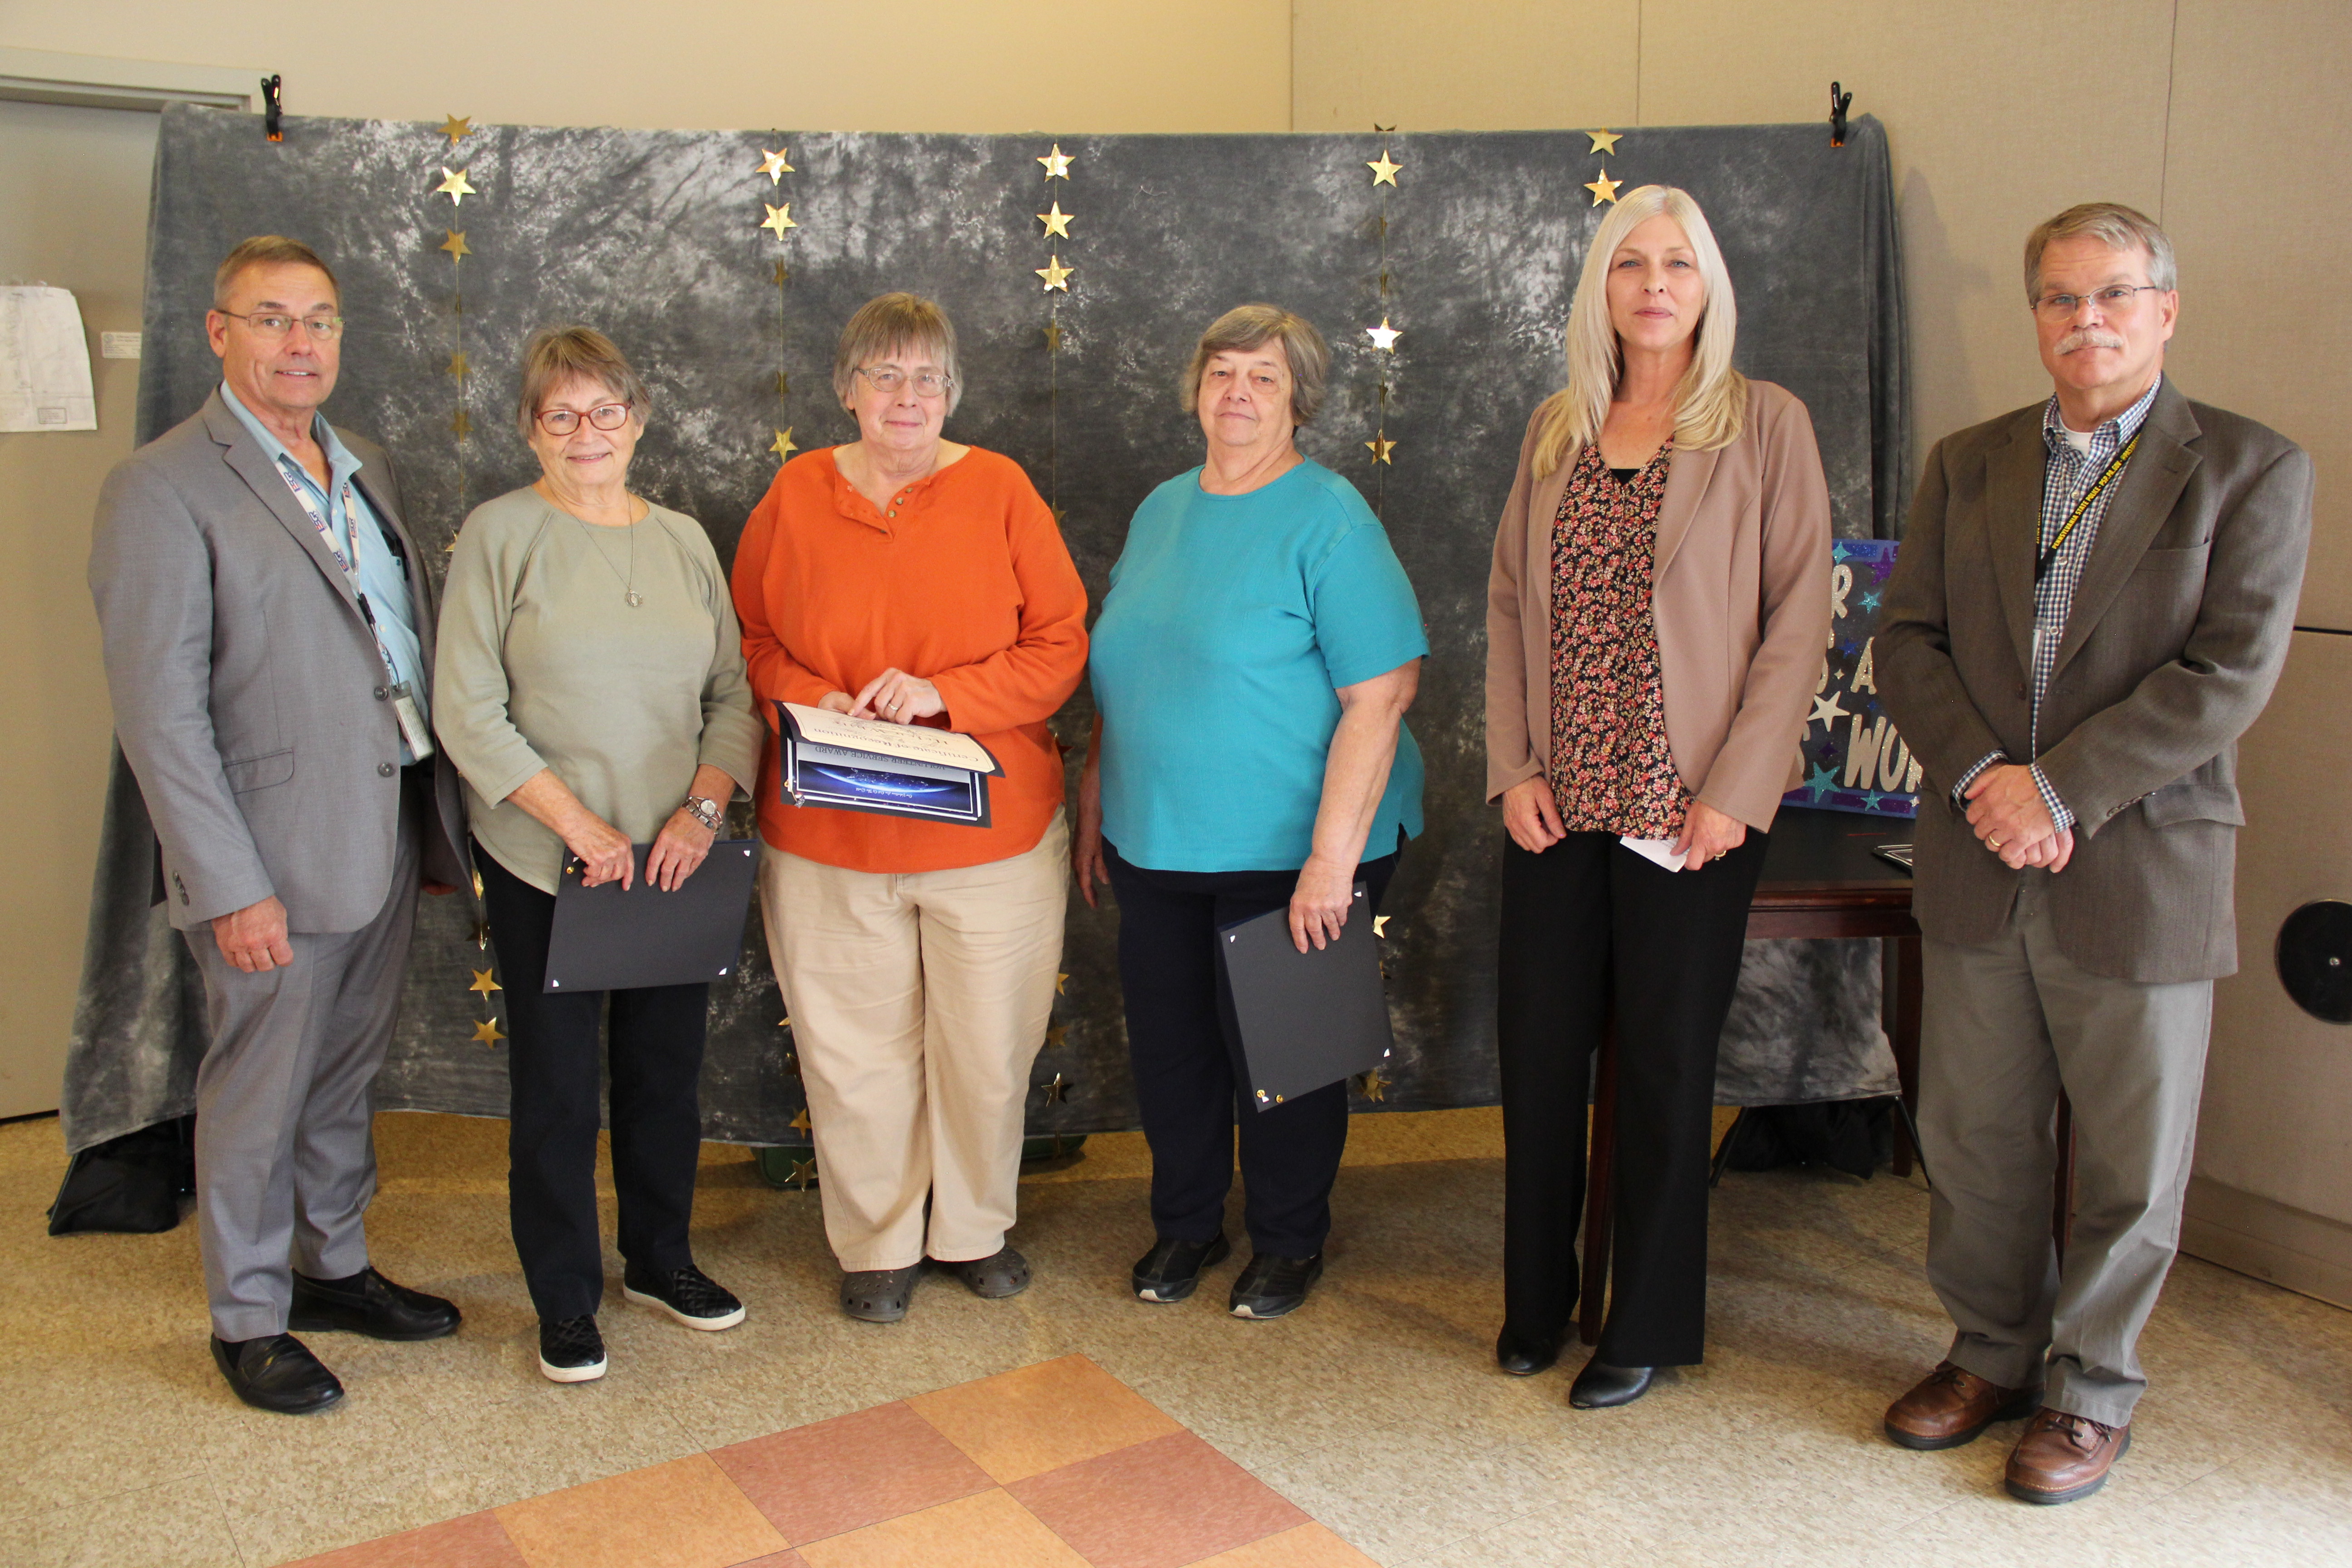 Volunteers recognized for 5 years of service were: (L to R) Arlene Milligan, Helen White, and Ethel Davis shown with Jefferson County Commissioner, Herb Bullers; Tracy Clark for Representative Brian Smith; and Commissioner Scott North.